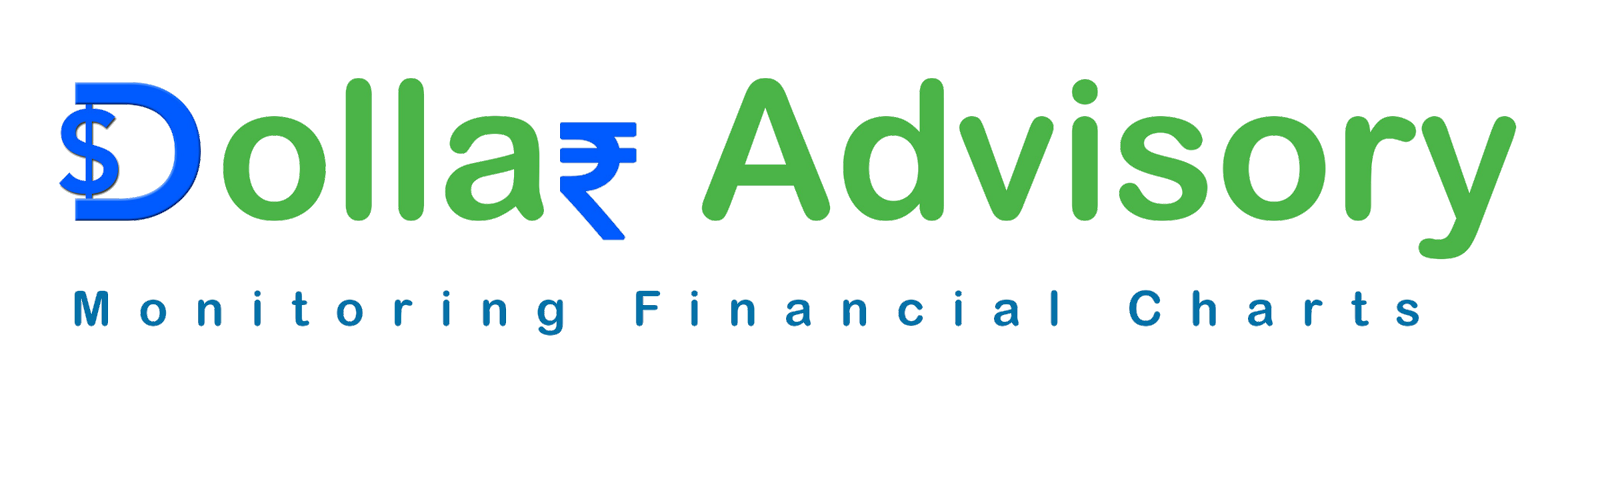 Dollar Advisory Services : Best Research Advisory Firm